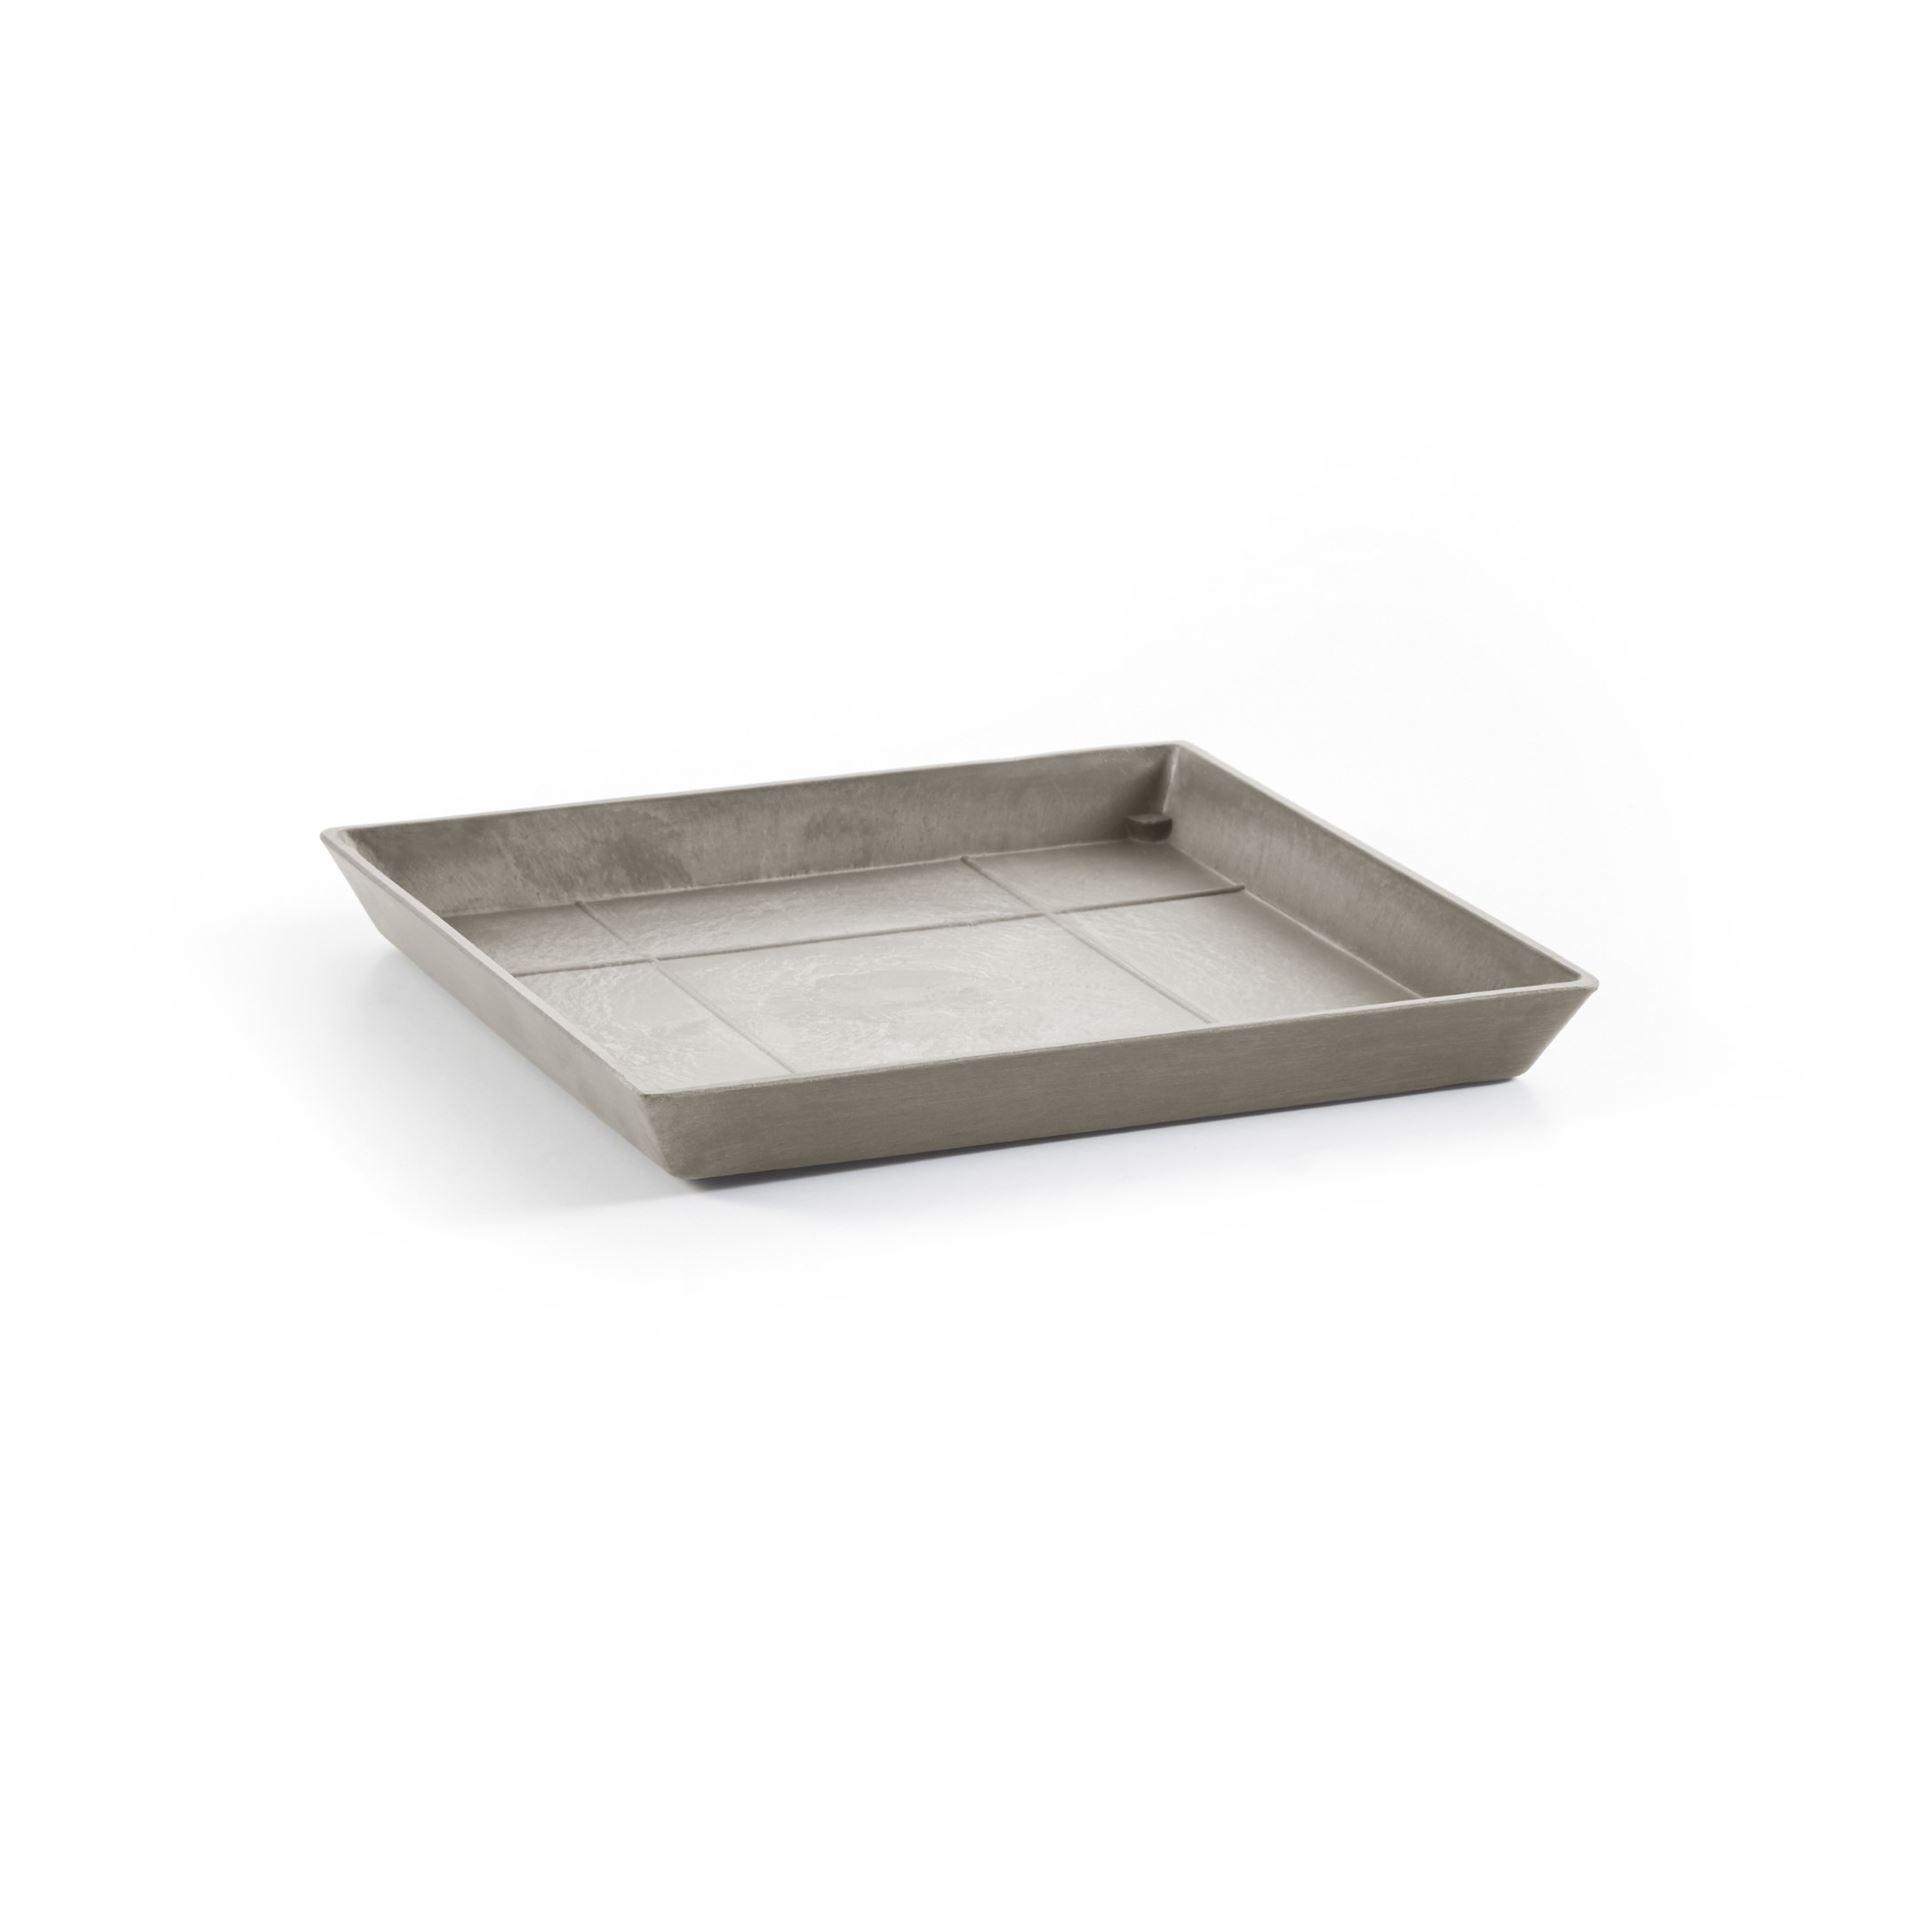 Ecopots Saucer Square - Taupe - 28 x H3 cm - Square taupe saucer with water reservoir